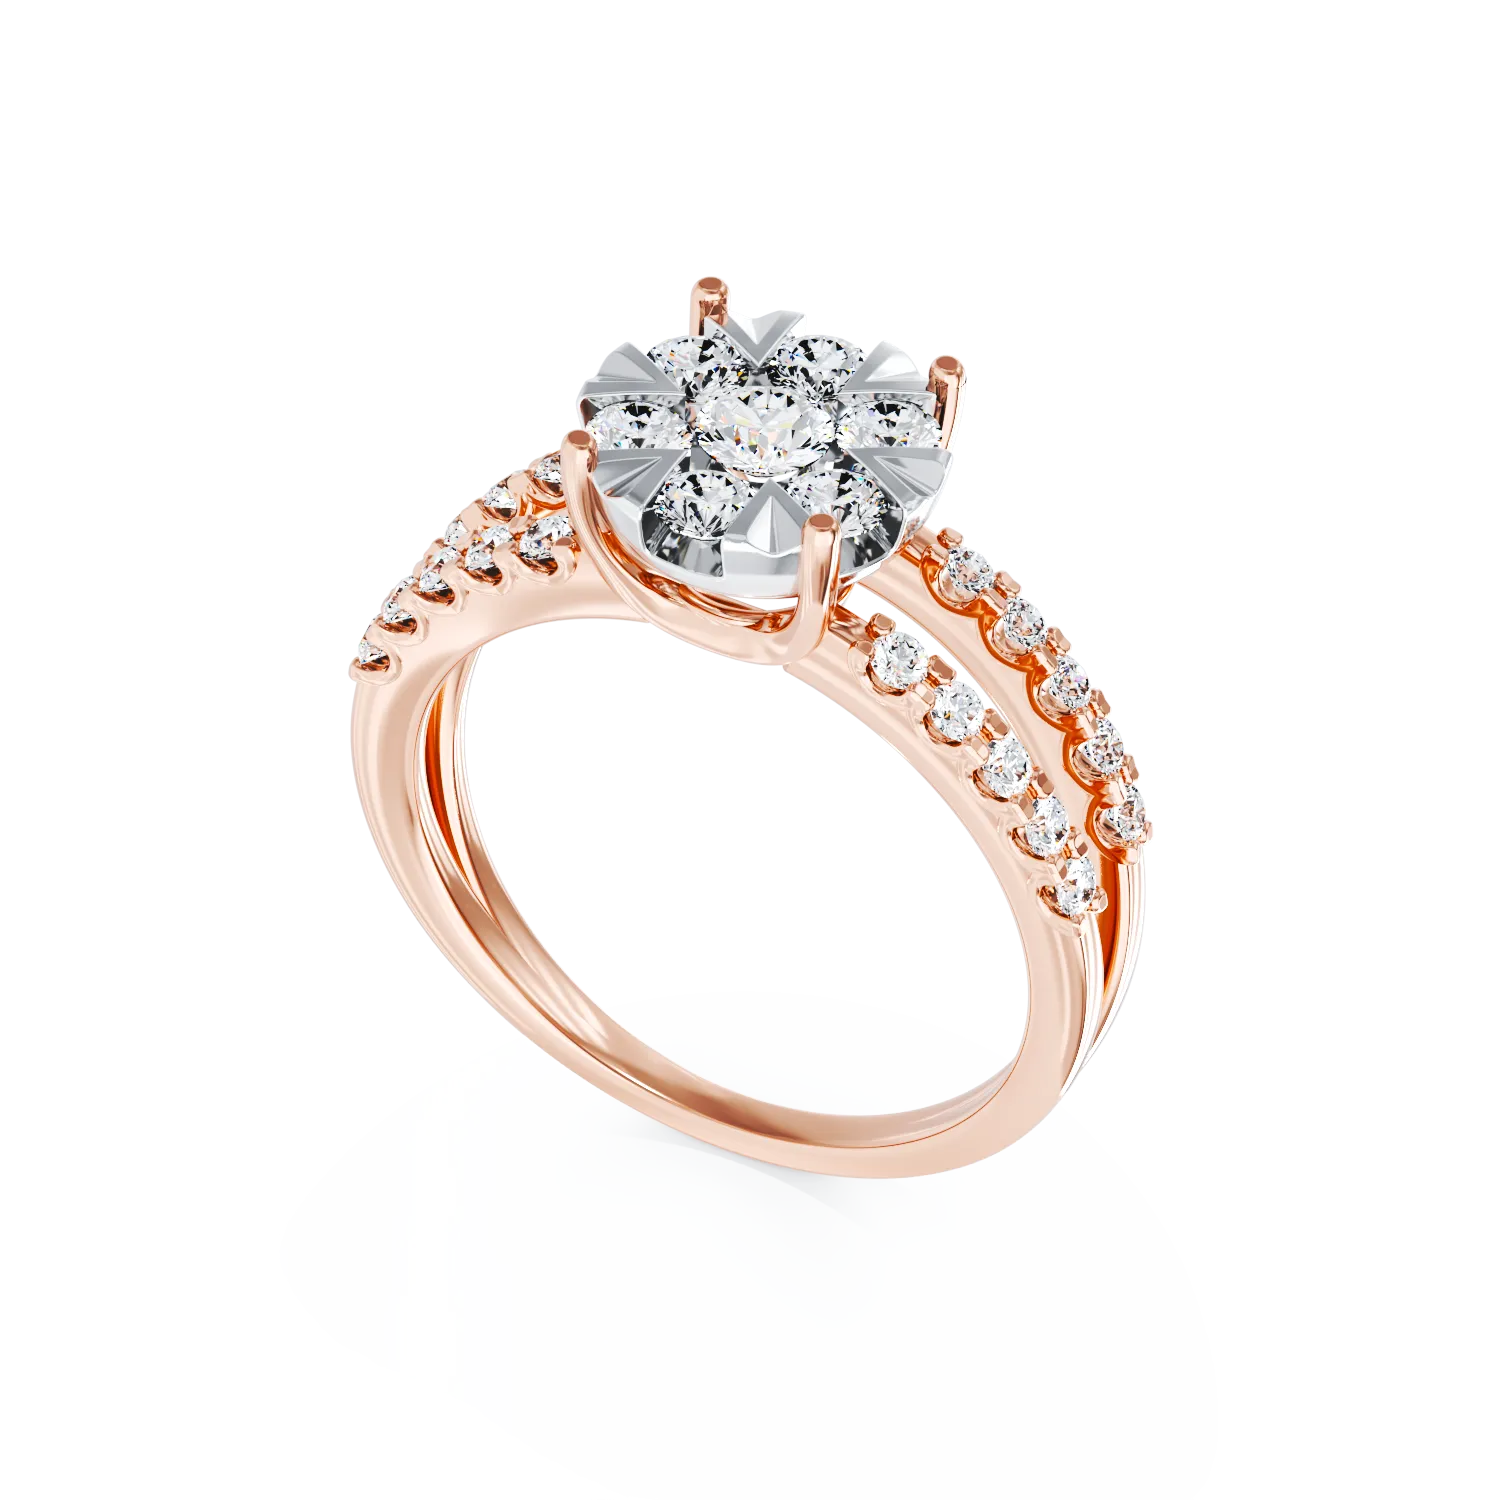 18K rose gold engagement ring with 1ct diamonds